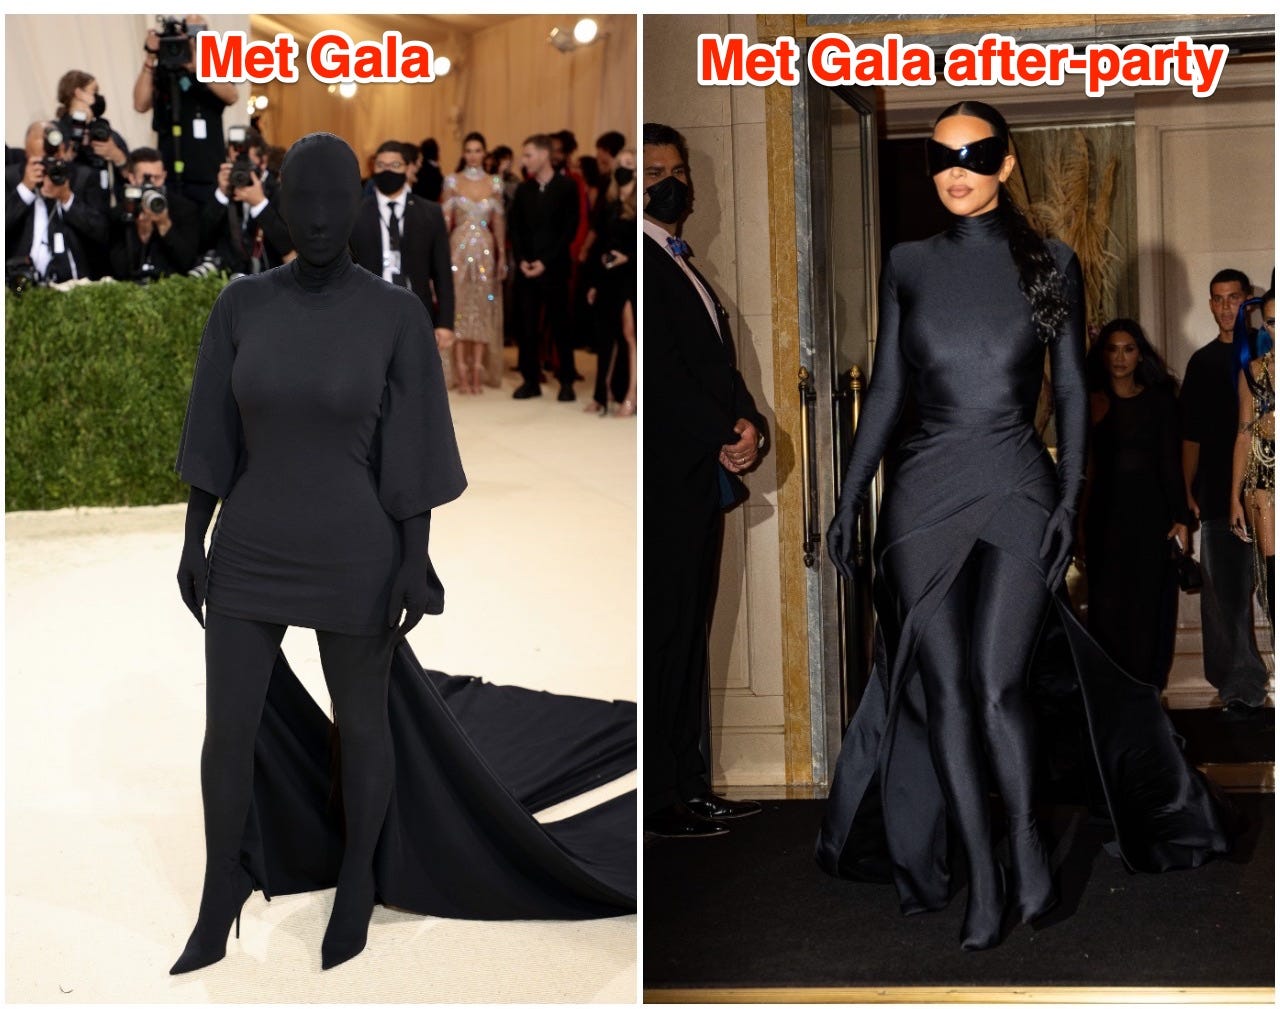 Kim Kardashian at the Met Gala 2021 (left) and on her way to the after-party (right).